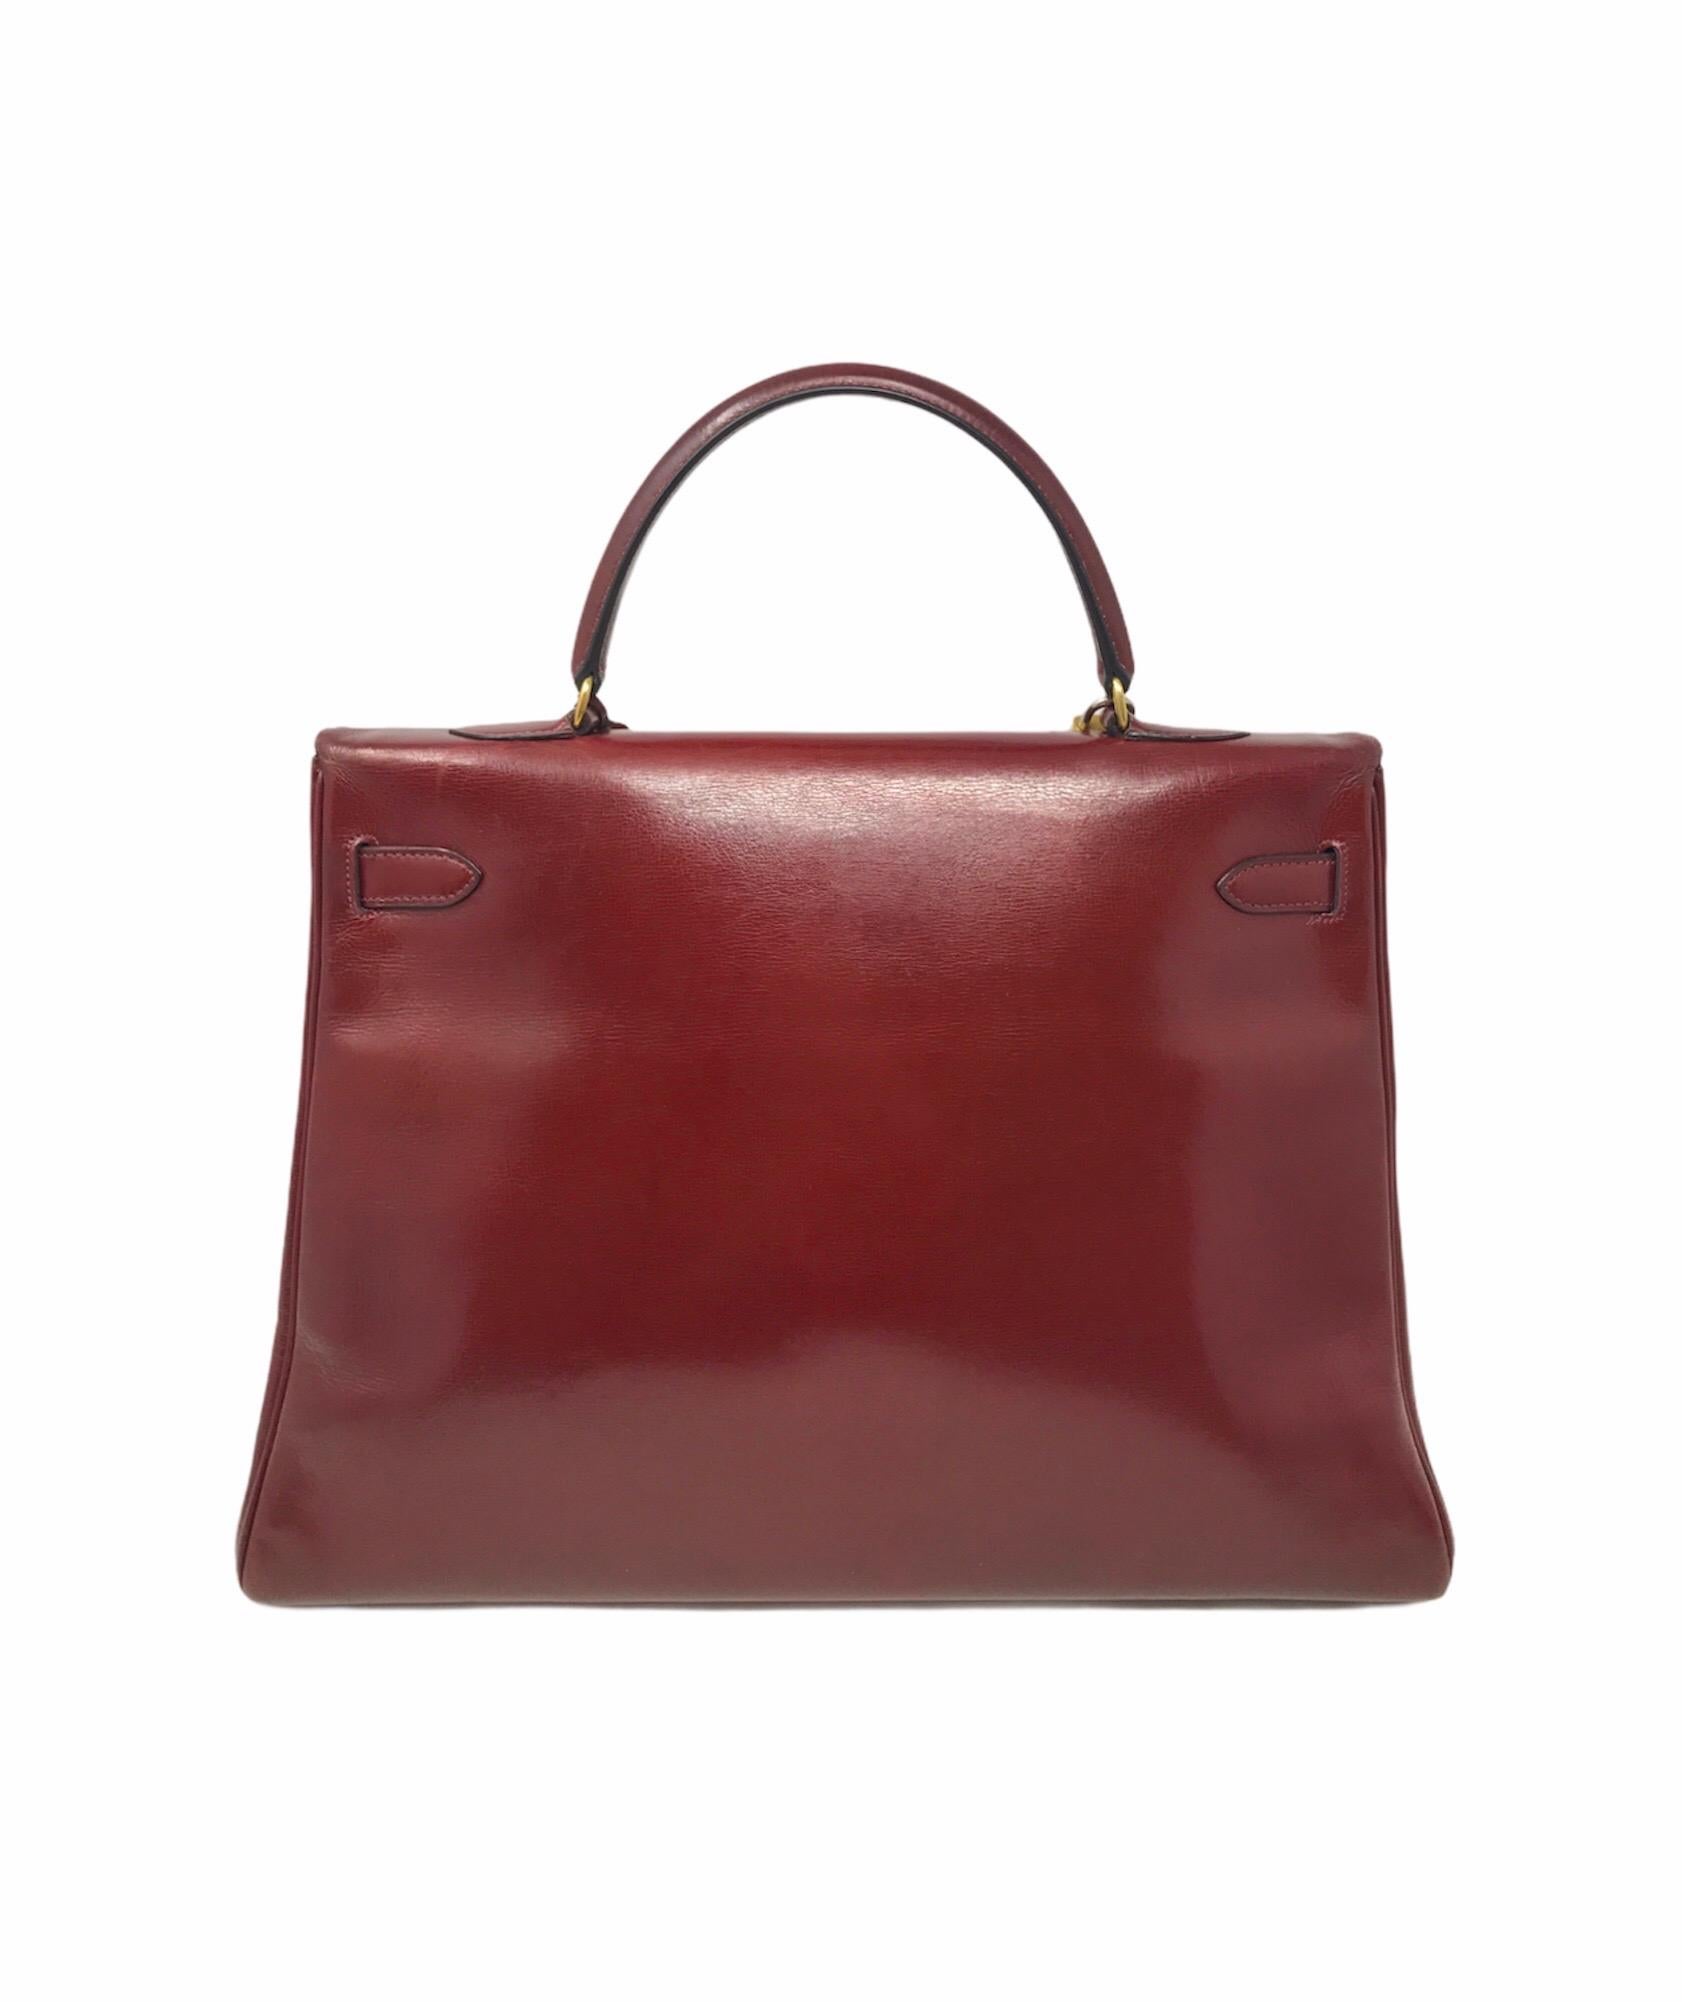 This iconic HERMES Kelly 35 vintage is in bordeaux box leather. The hardware is gold plated.  Included : a clochette, keys and padlock.  This bag is marked by the stamp S, meaning of the year 1960.  It is in good condition. The leather is cracked on